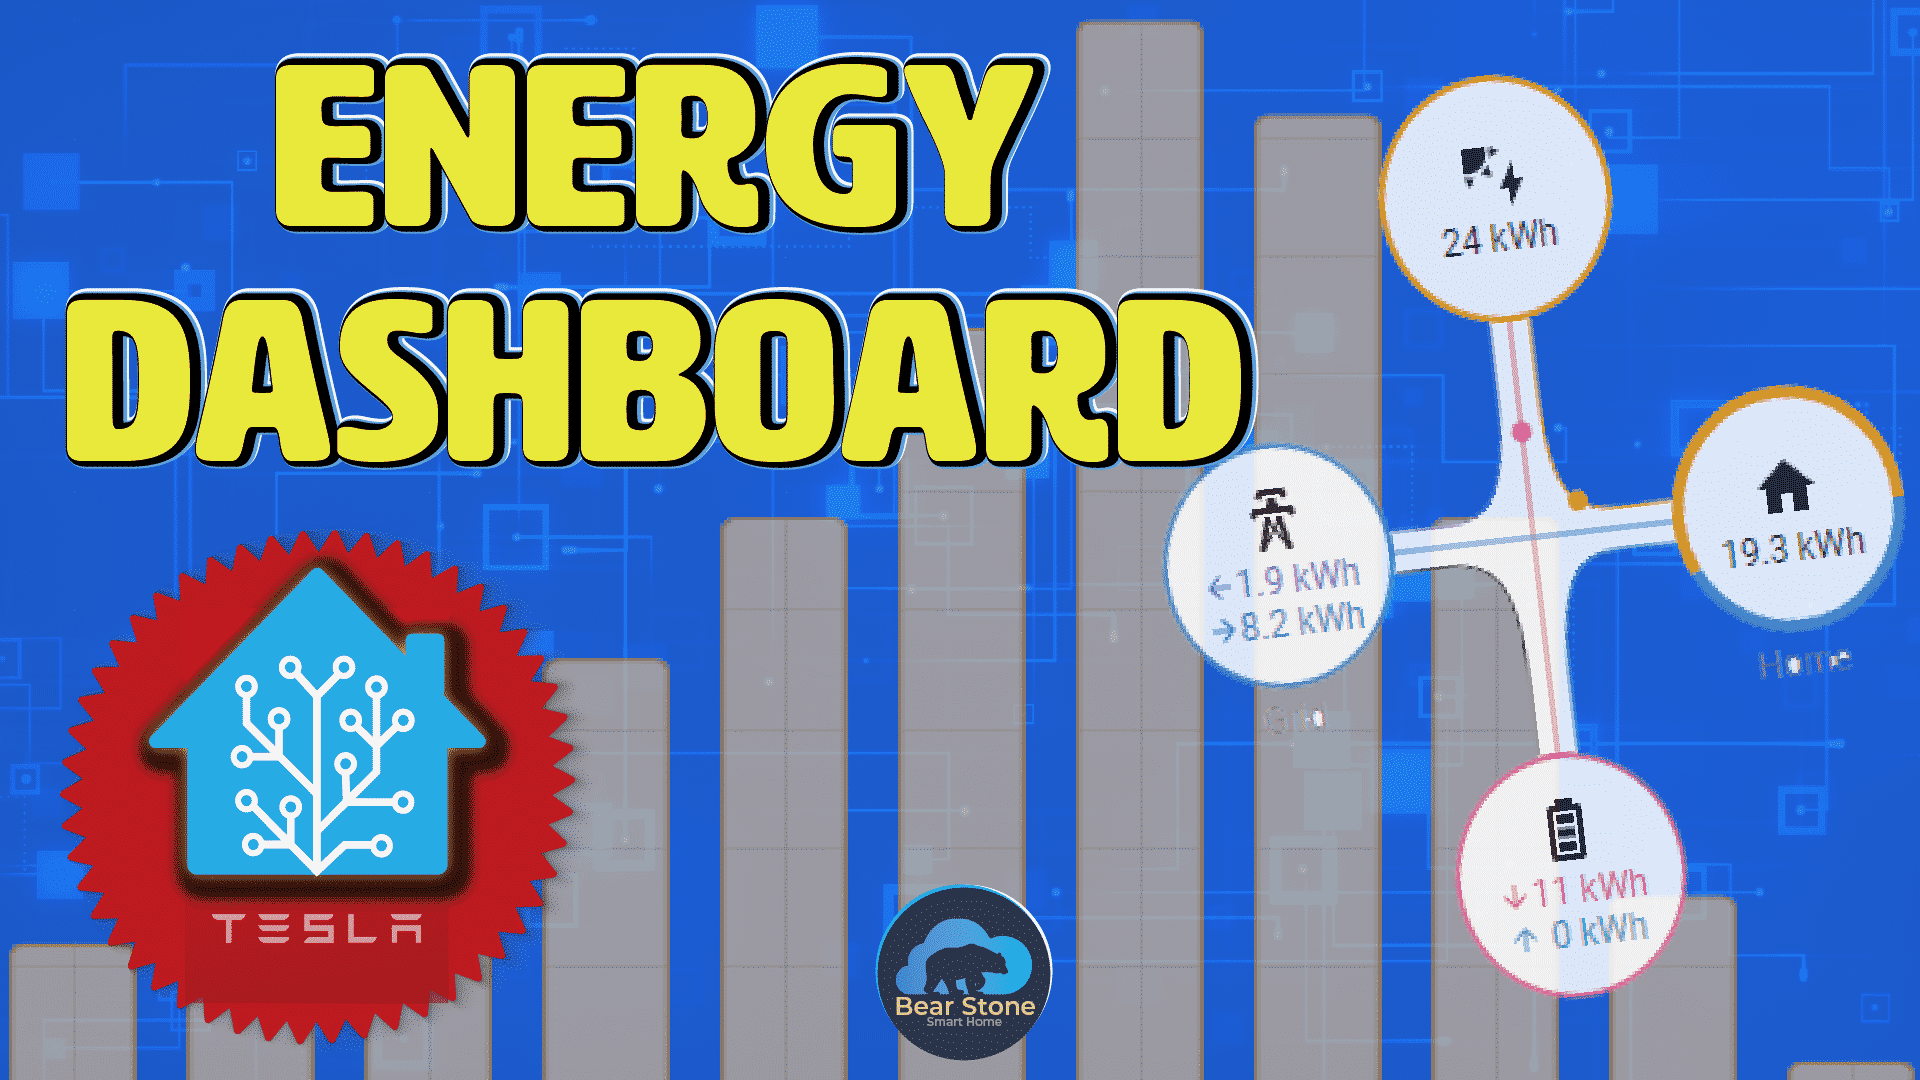 How to Configure Home Assistant Energy Dashboard 1